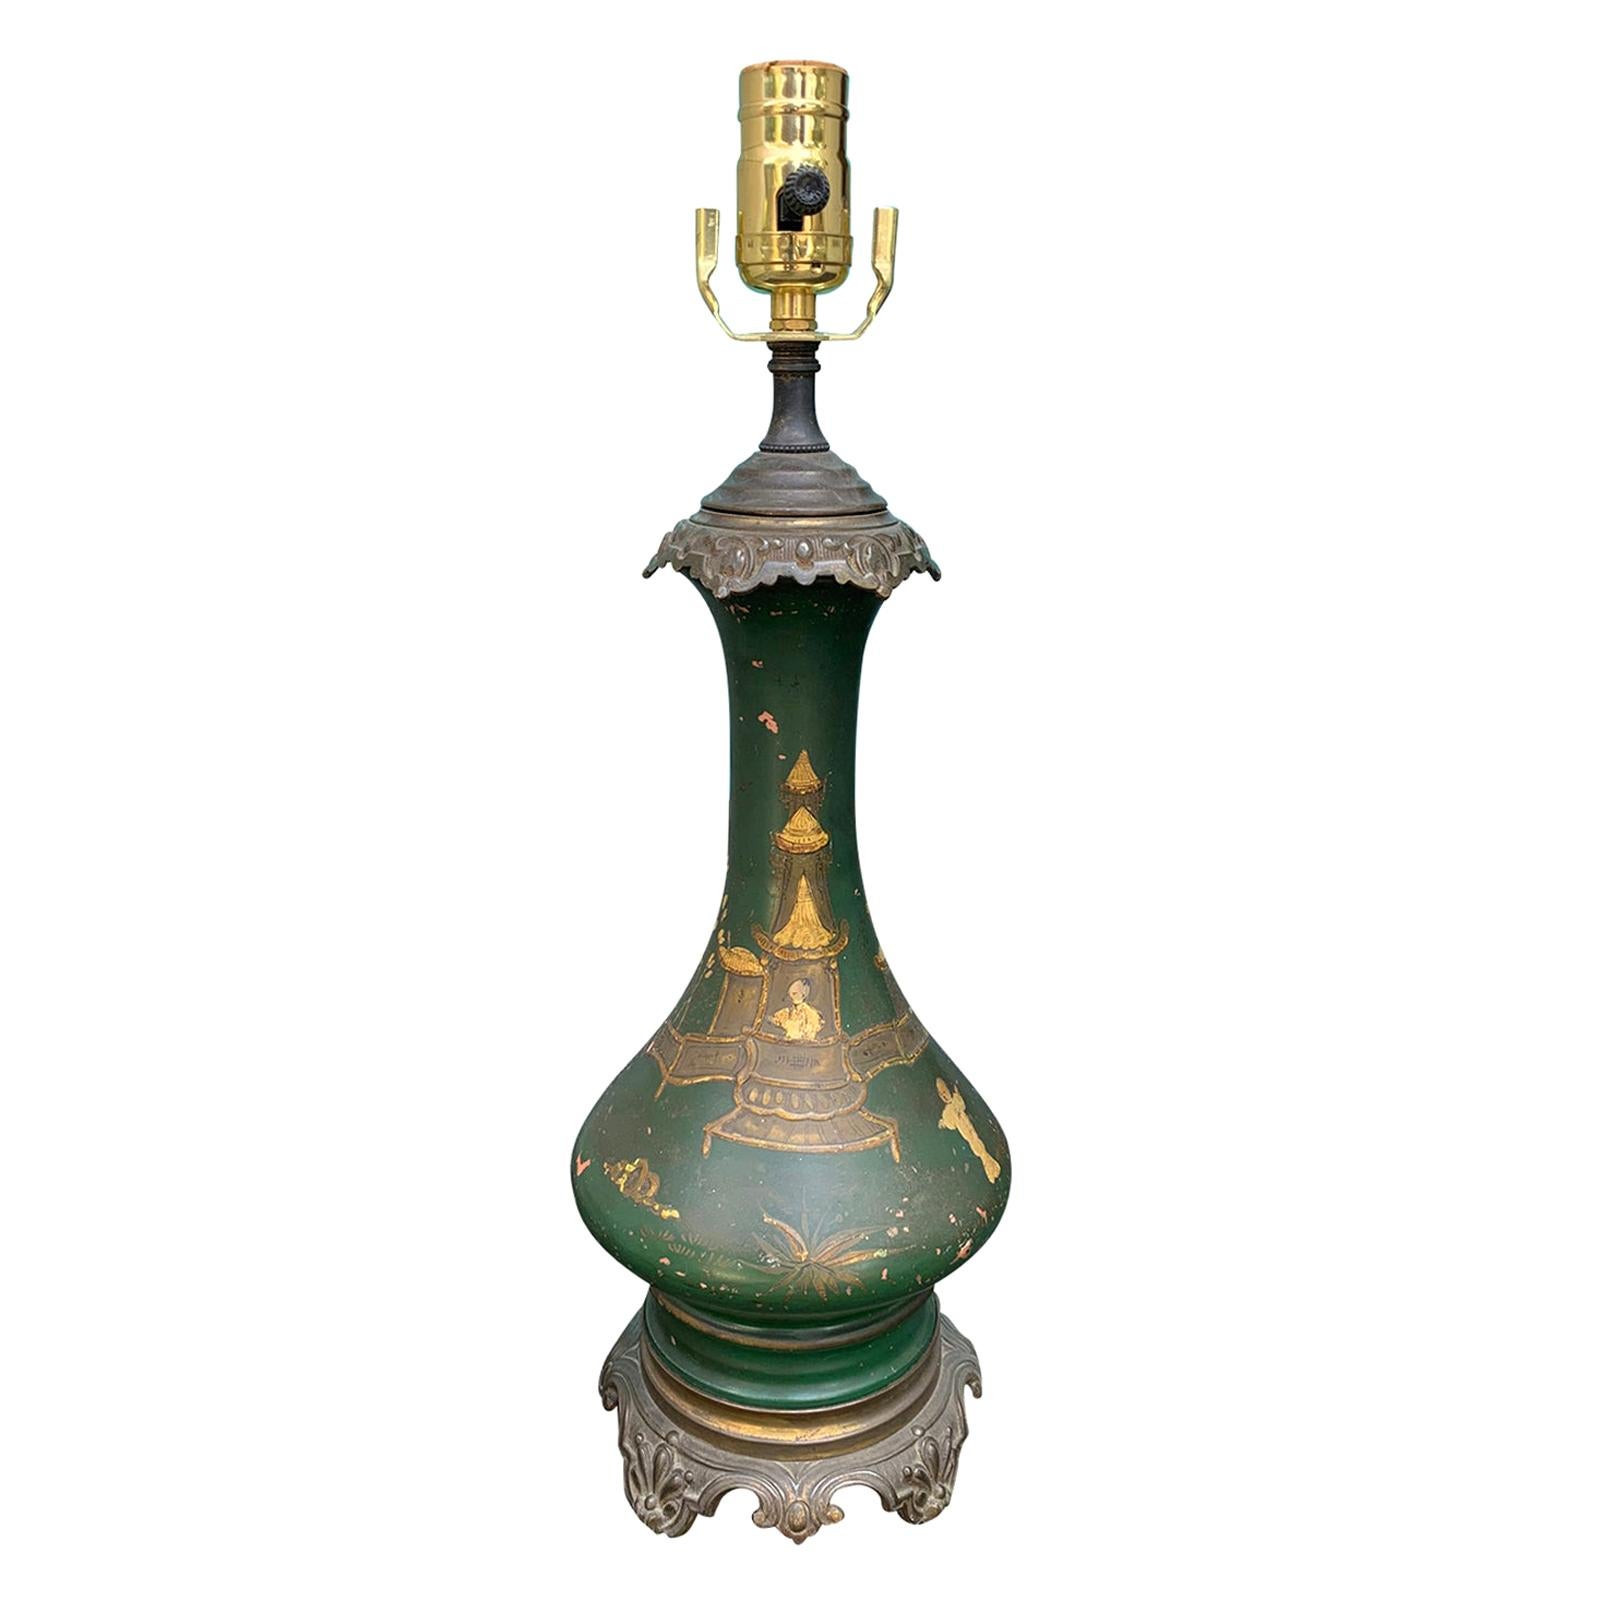 19th Century French Chinoiserie Glazed Terracotta Lamp with Original Mounts